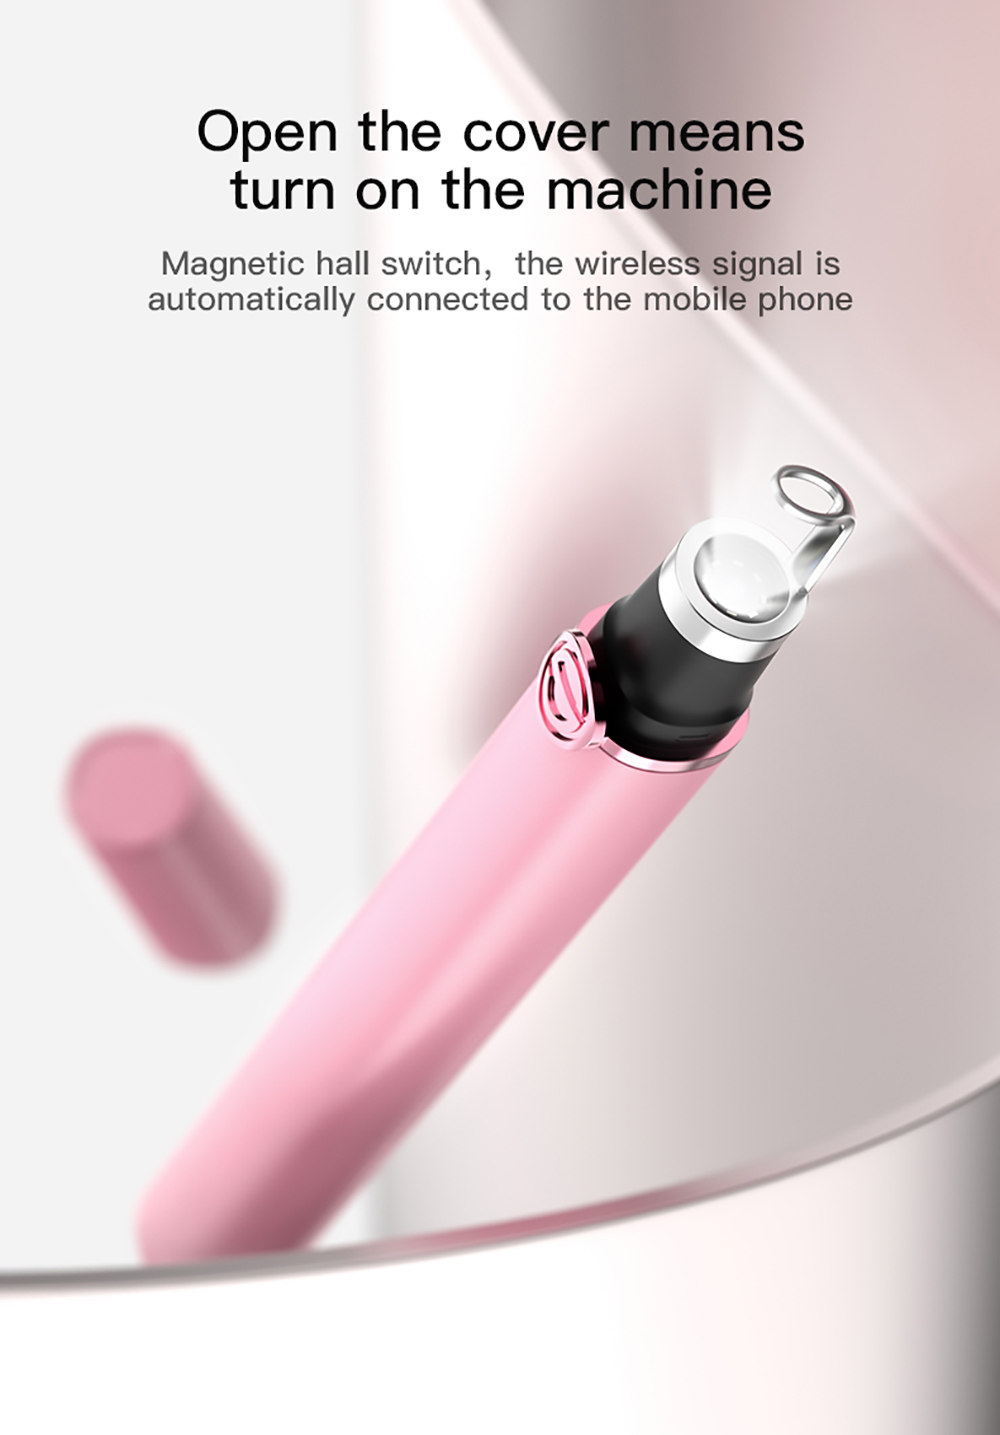 SUNUO M3 Smart Visible Acne Removal Cleaner, 500W HD Camera, 20X Magnification, WiFi Connection, IP65 Waterproof - Pink